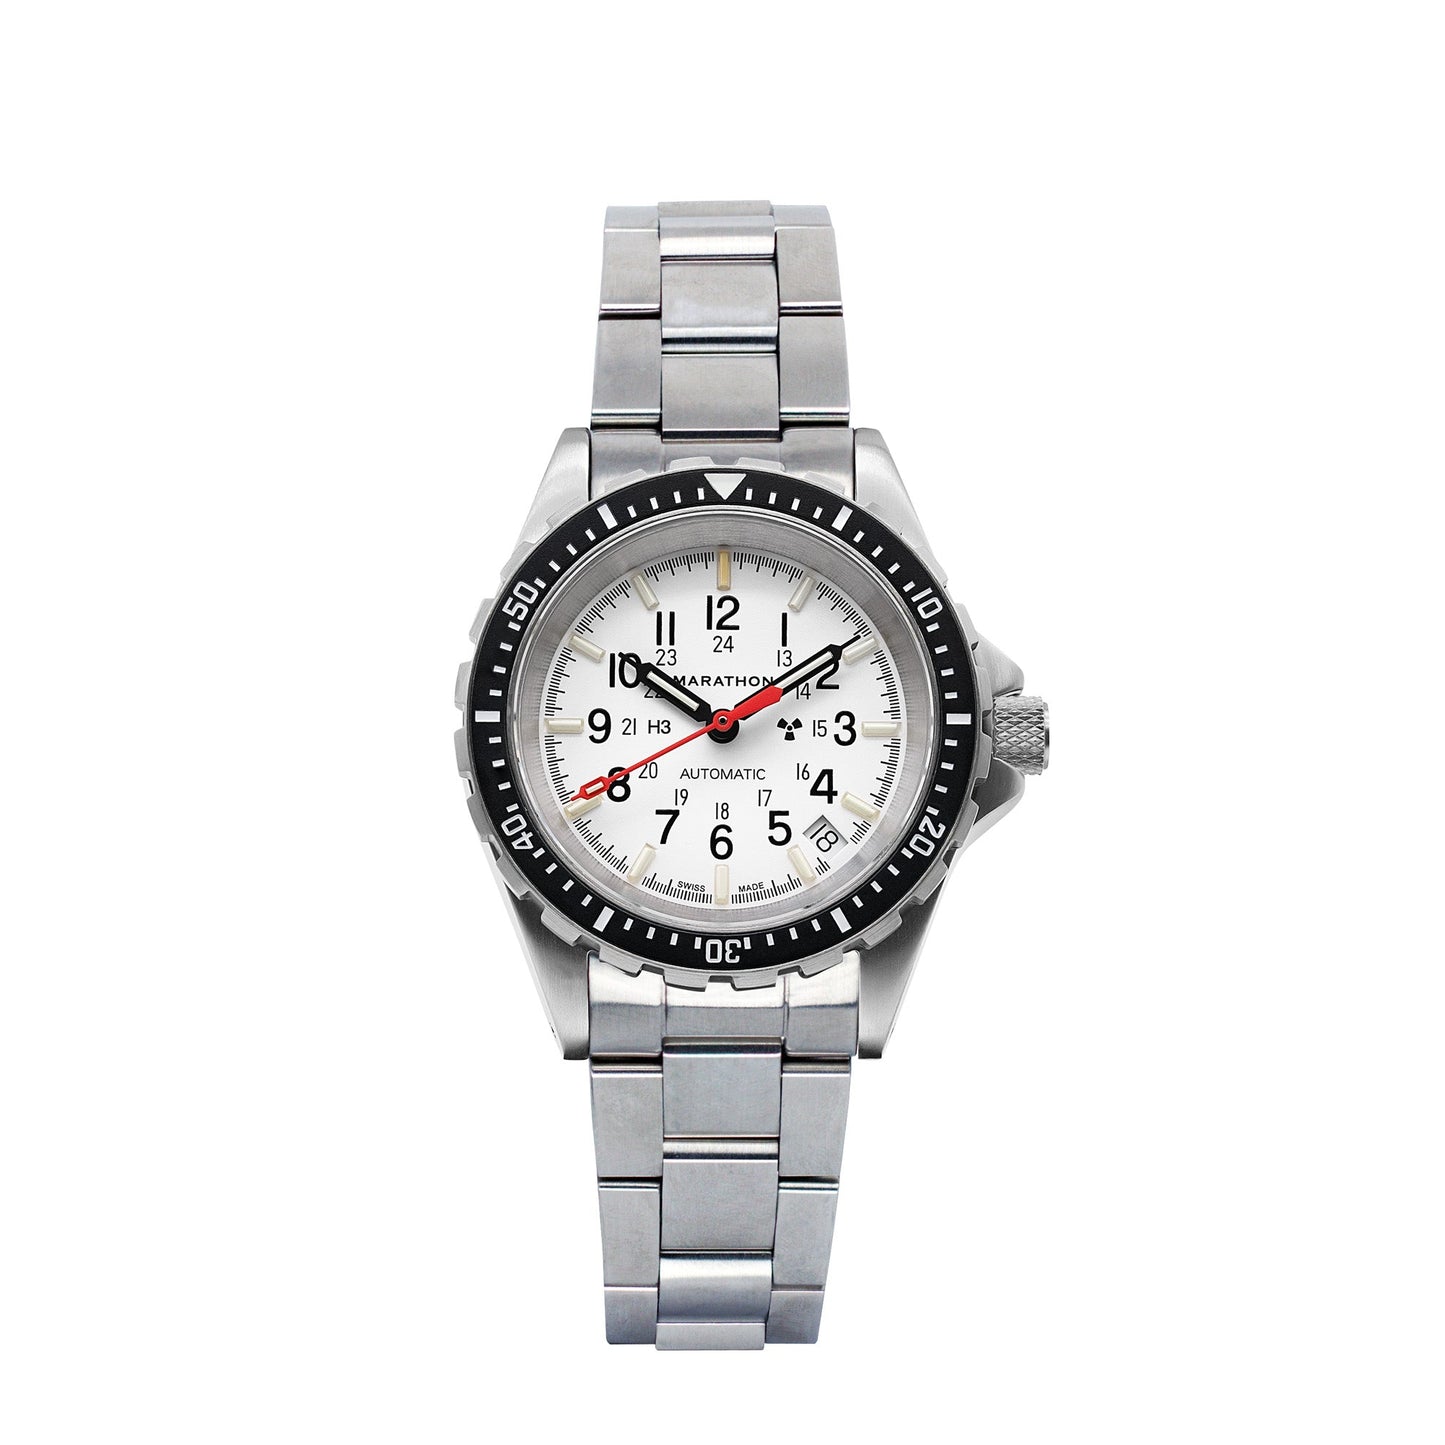 ARCTIC EDITION MEDIUM DIVER'S AUTOMATIC (MSAR AUTO) WITH STAINLESS STEEL BRACELET - 36MM